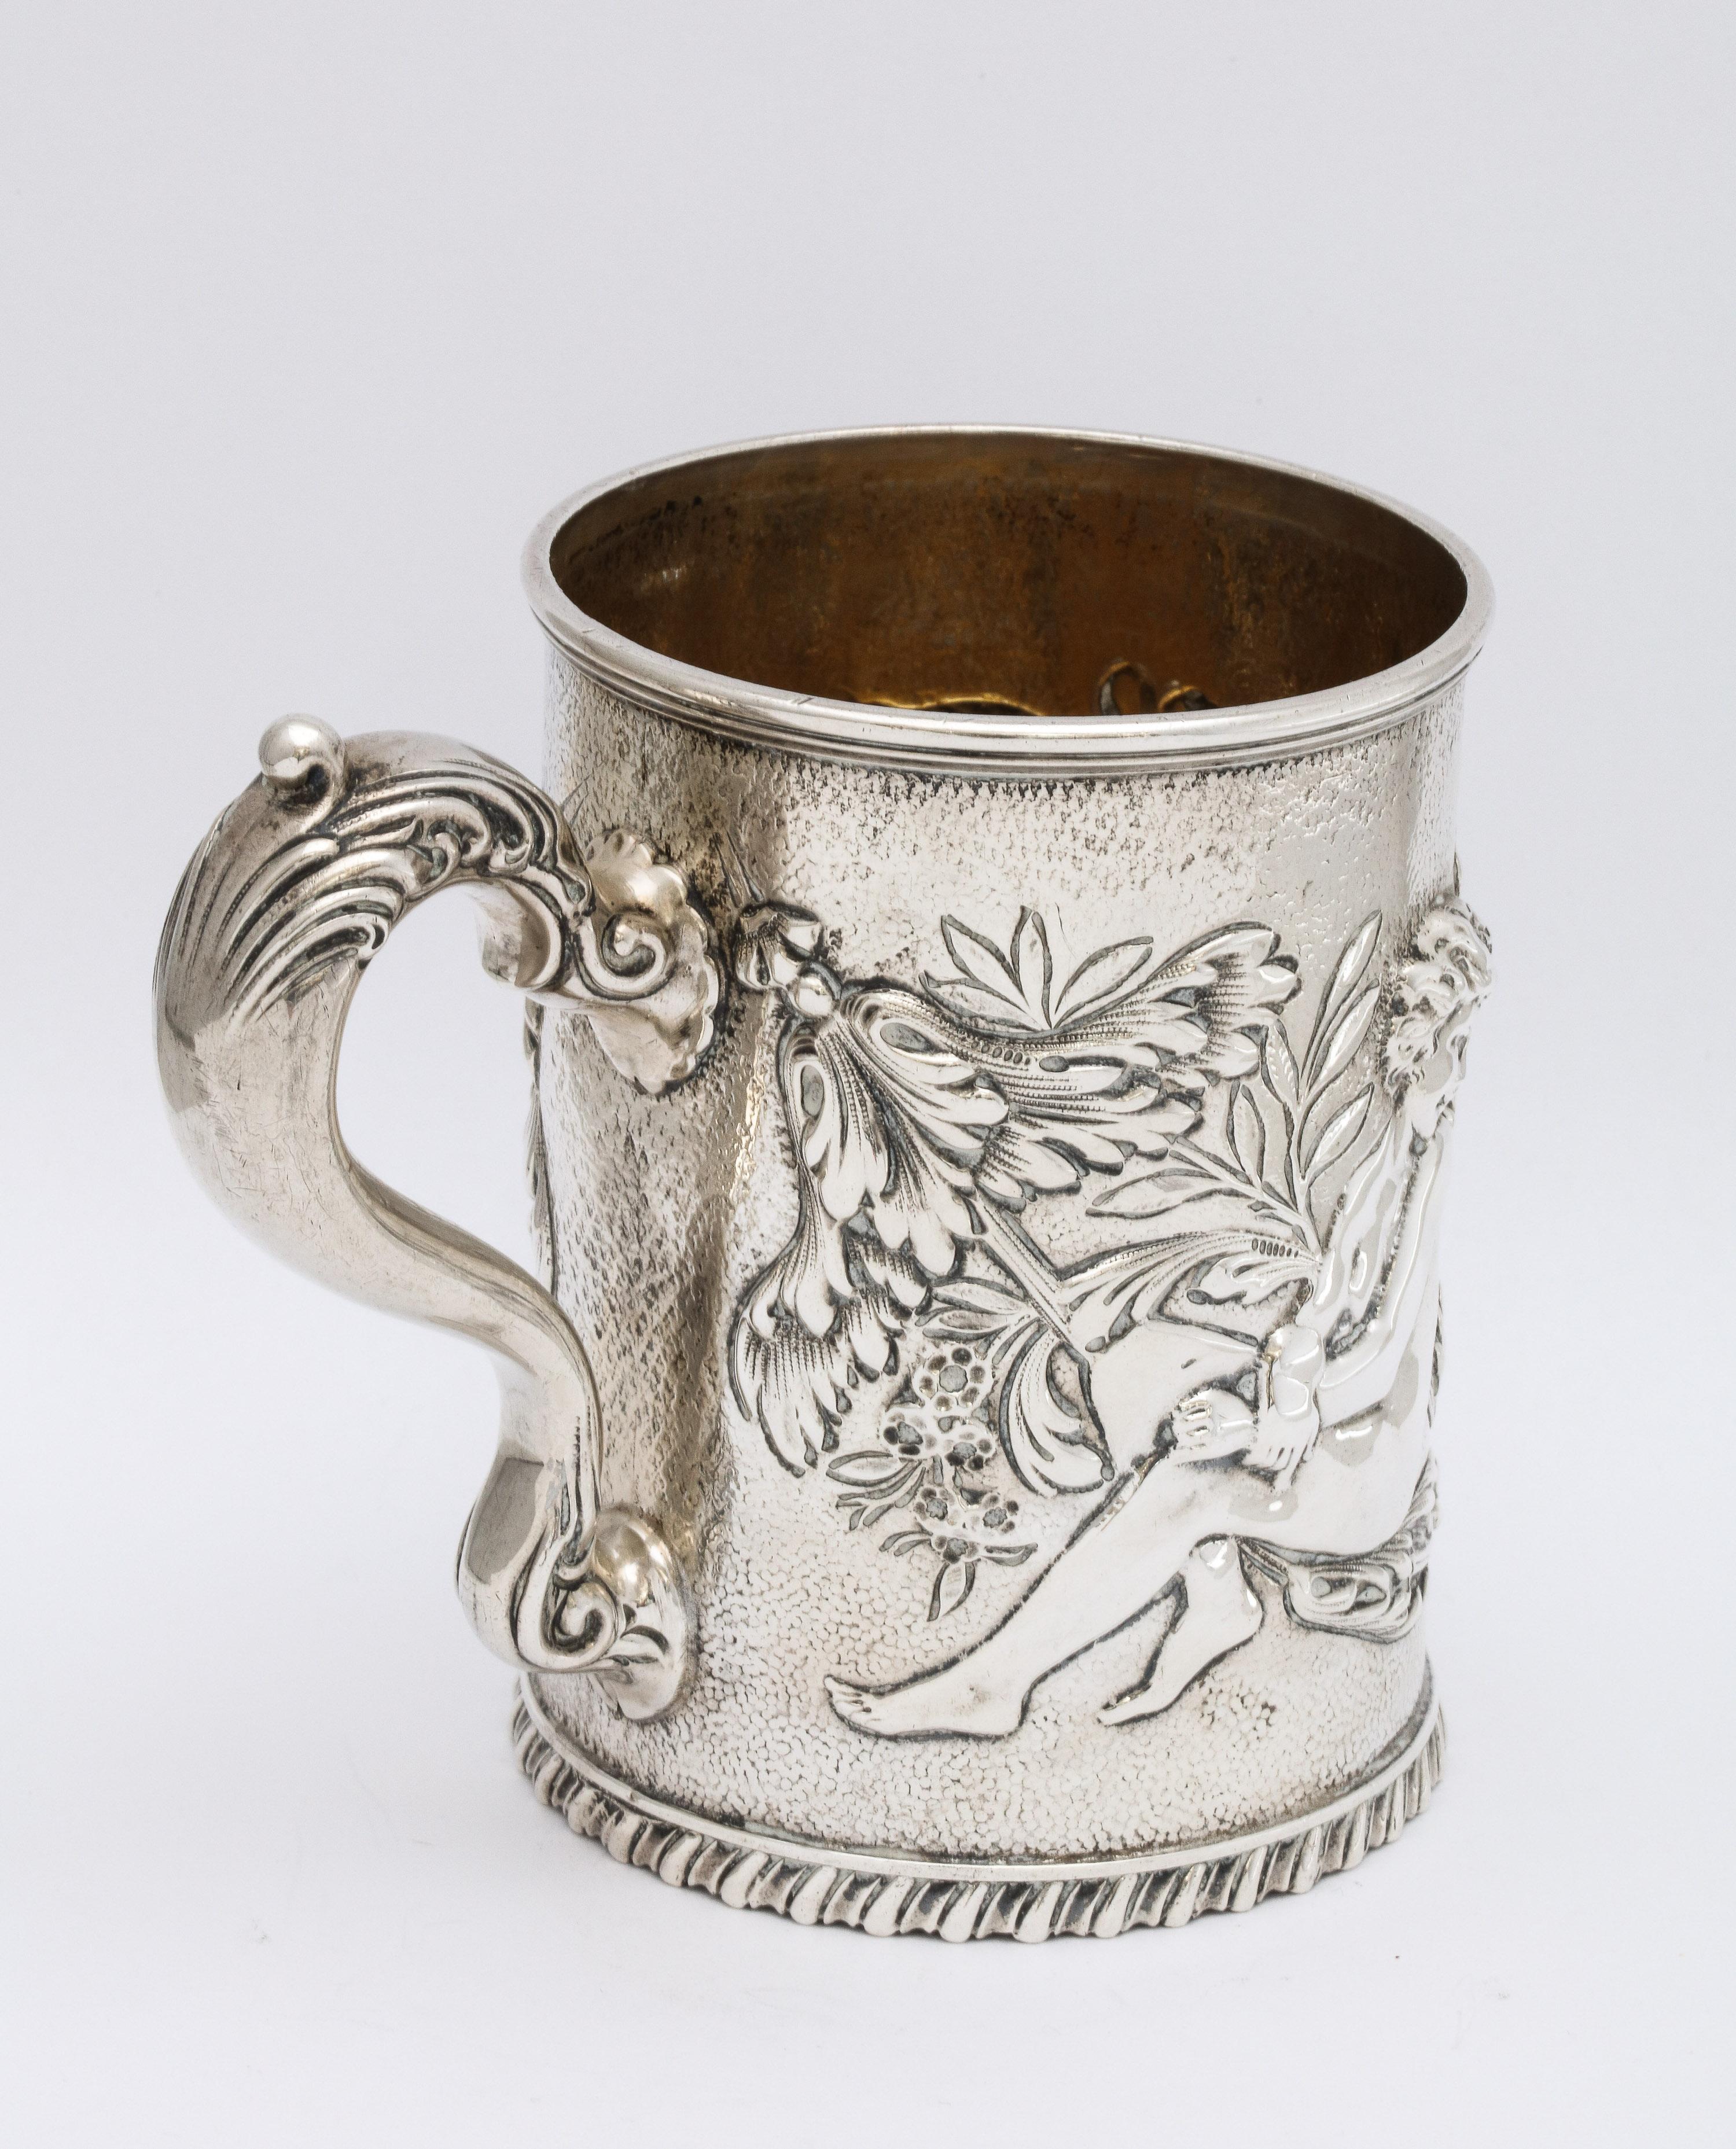 Neoclassical Sterling Silver Mug/Cup by The Whiting Mfg. Co. For Sale 2